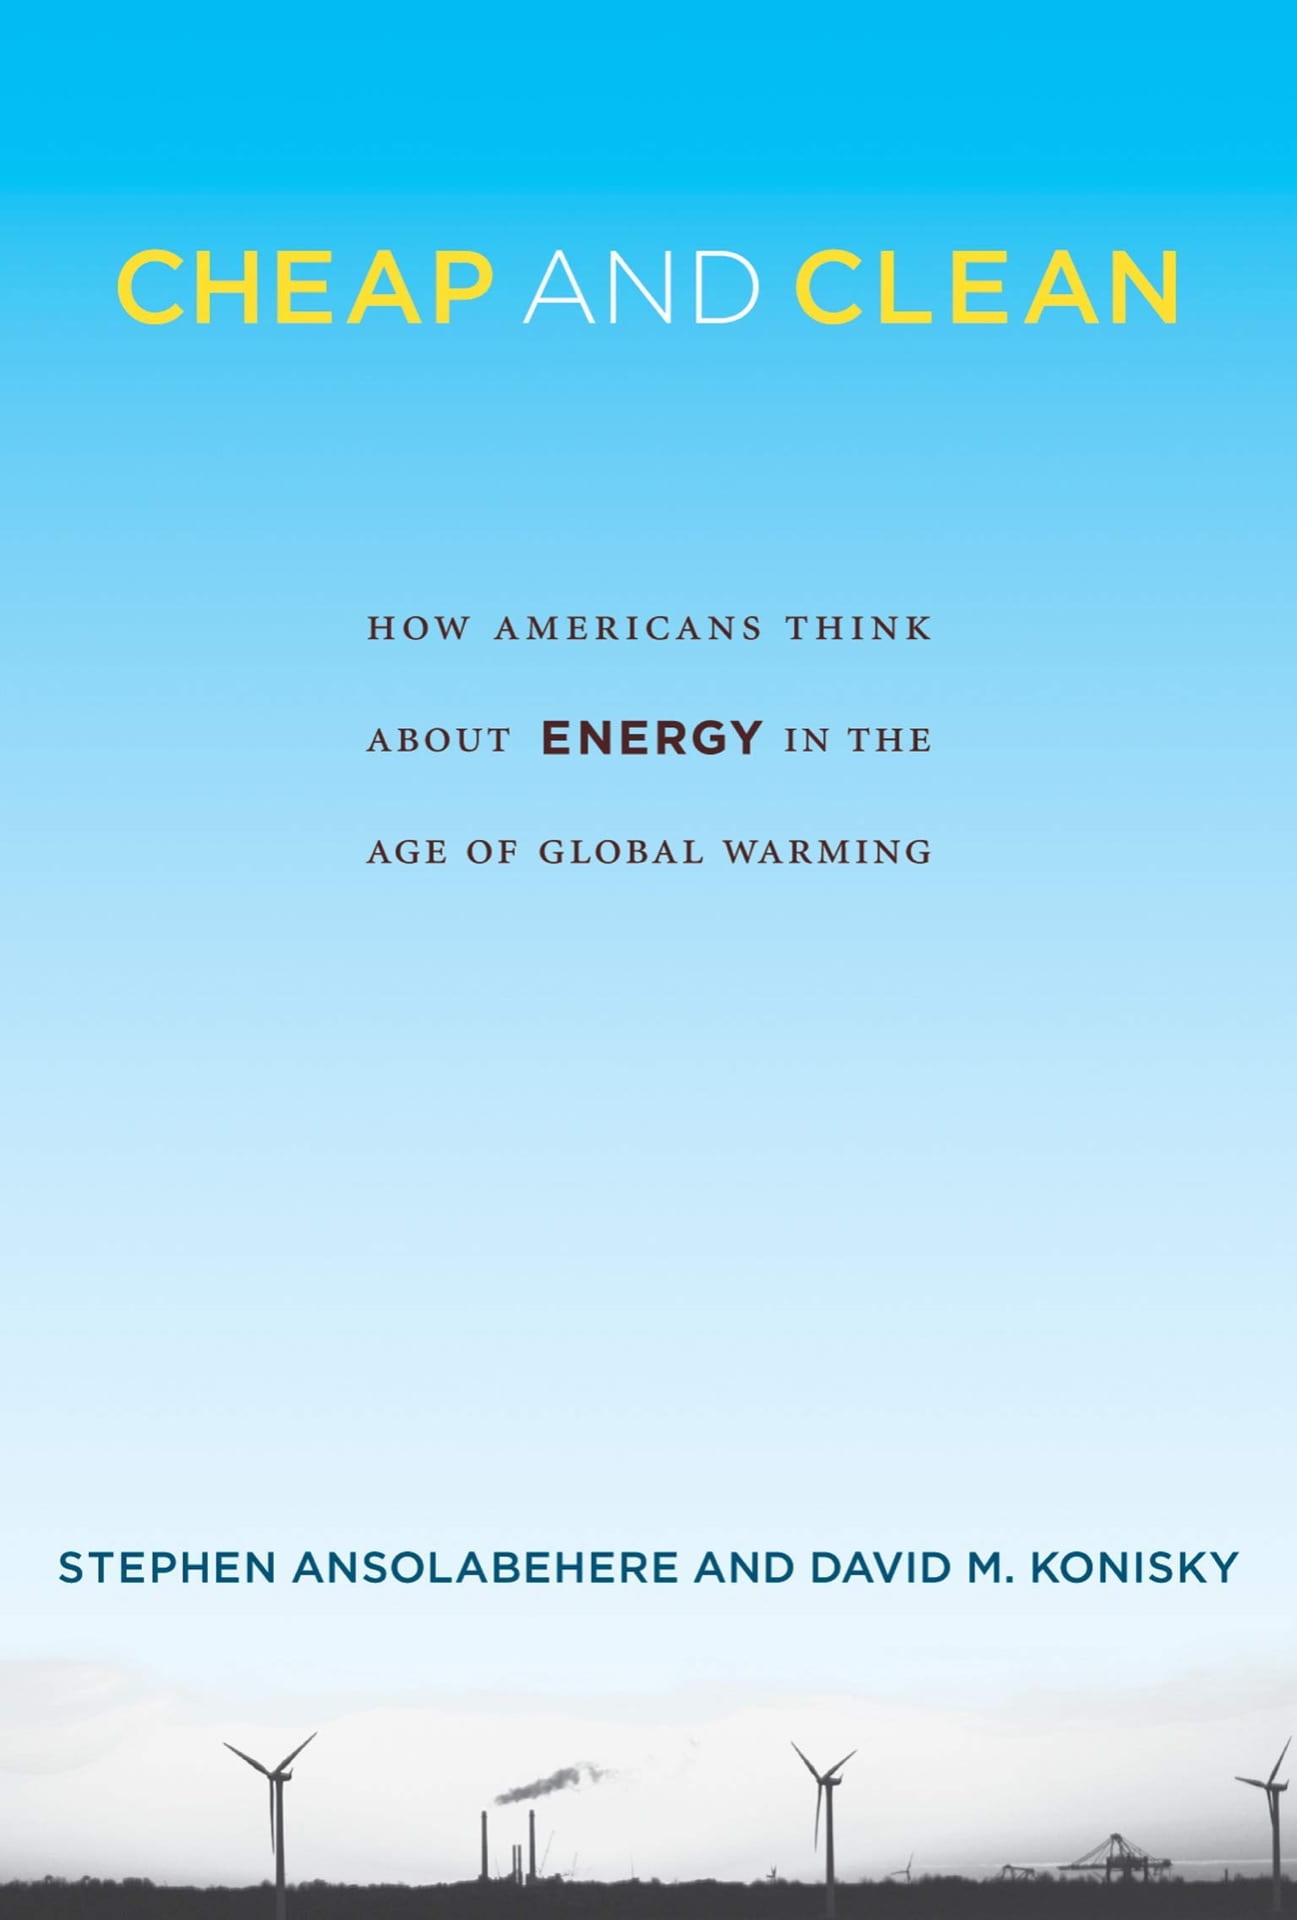 "Cheap and Clean: How Americans Think About Energy in the Age of Global Warming" Book Cover